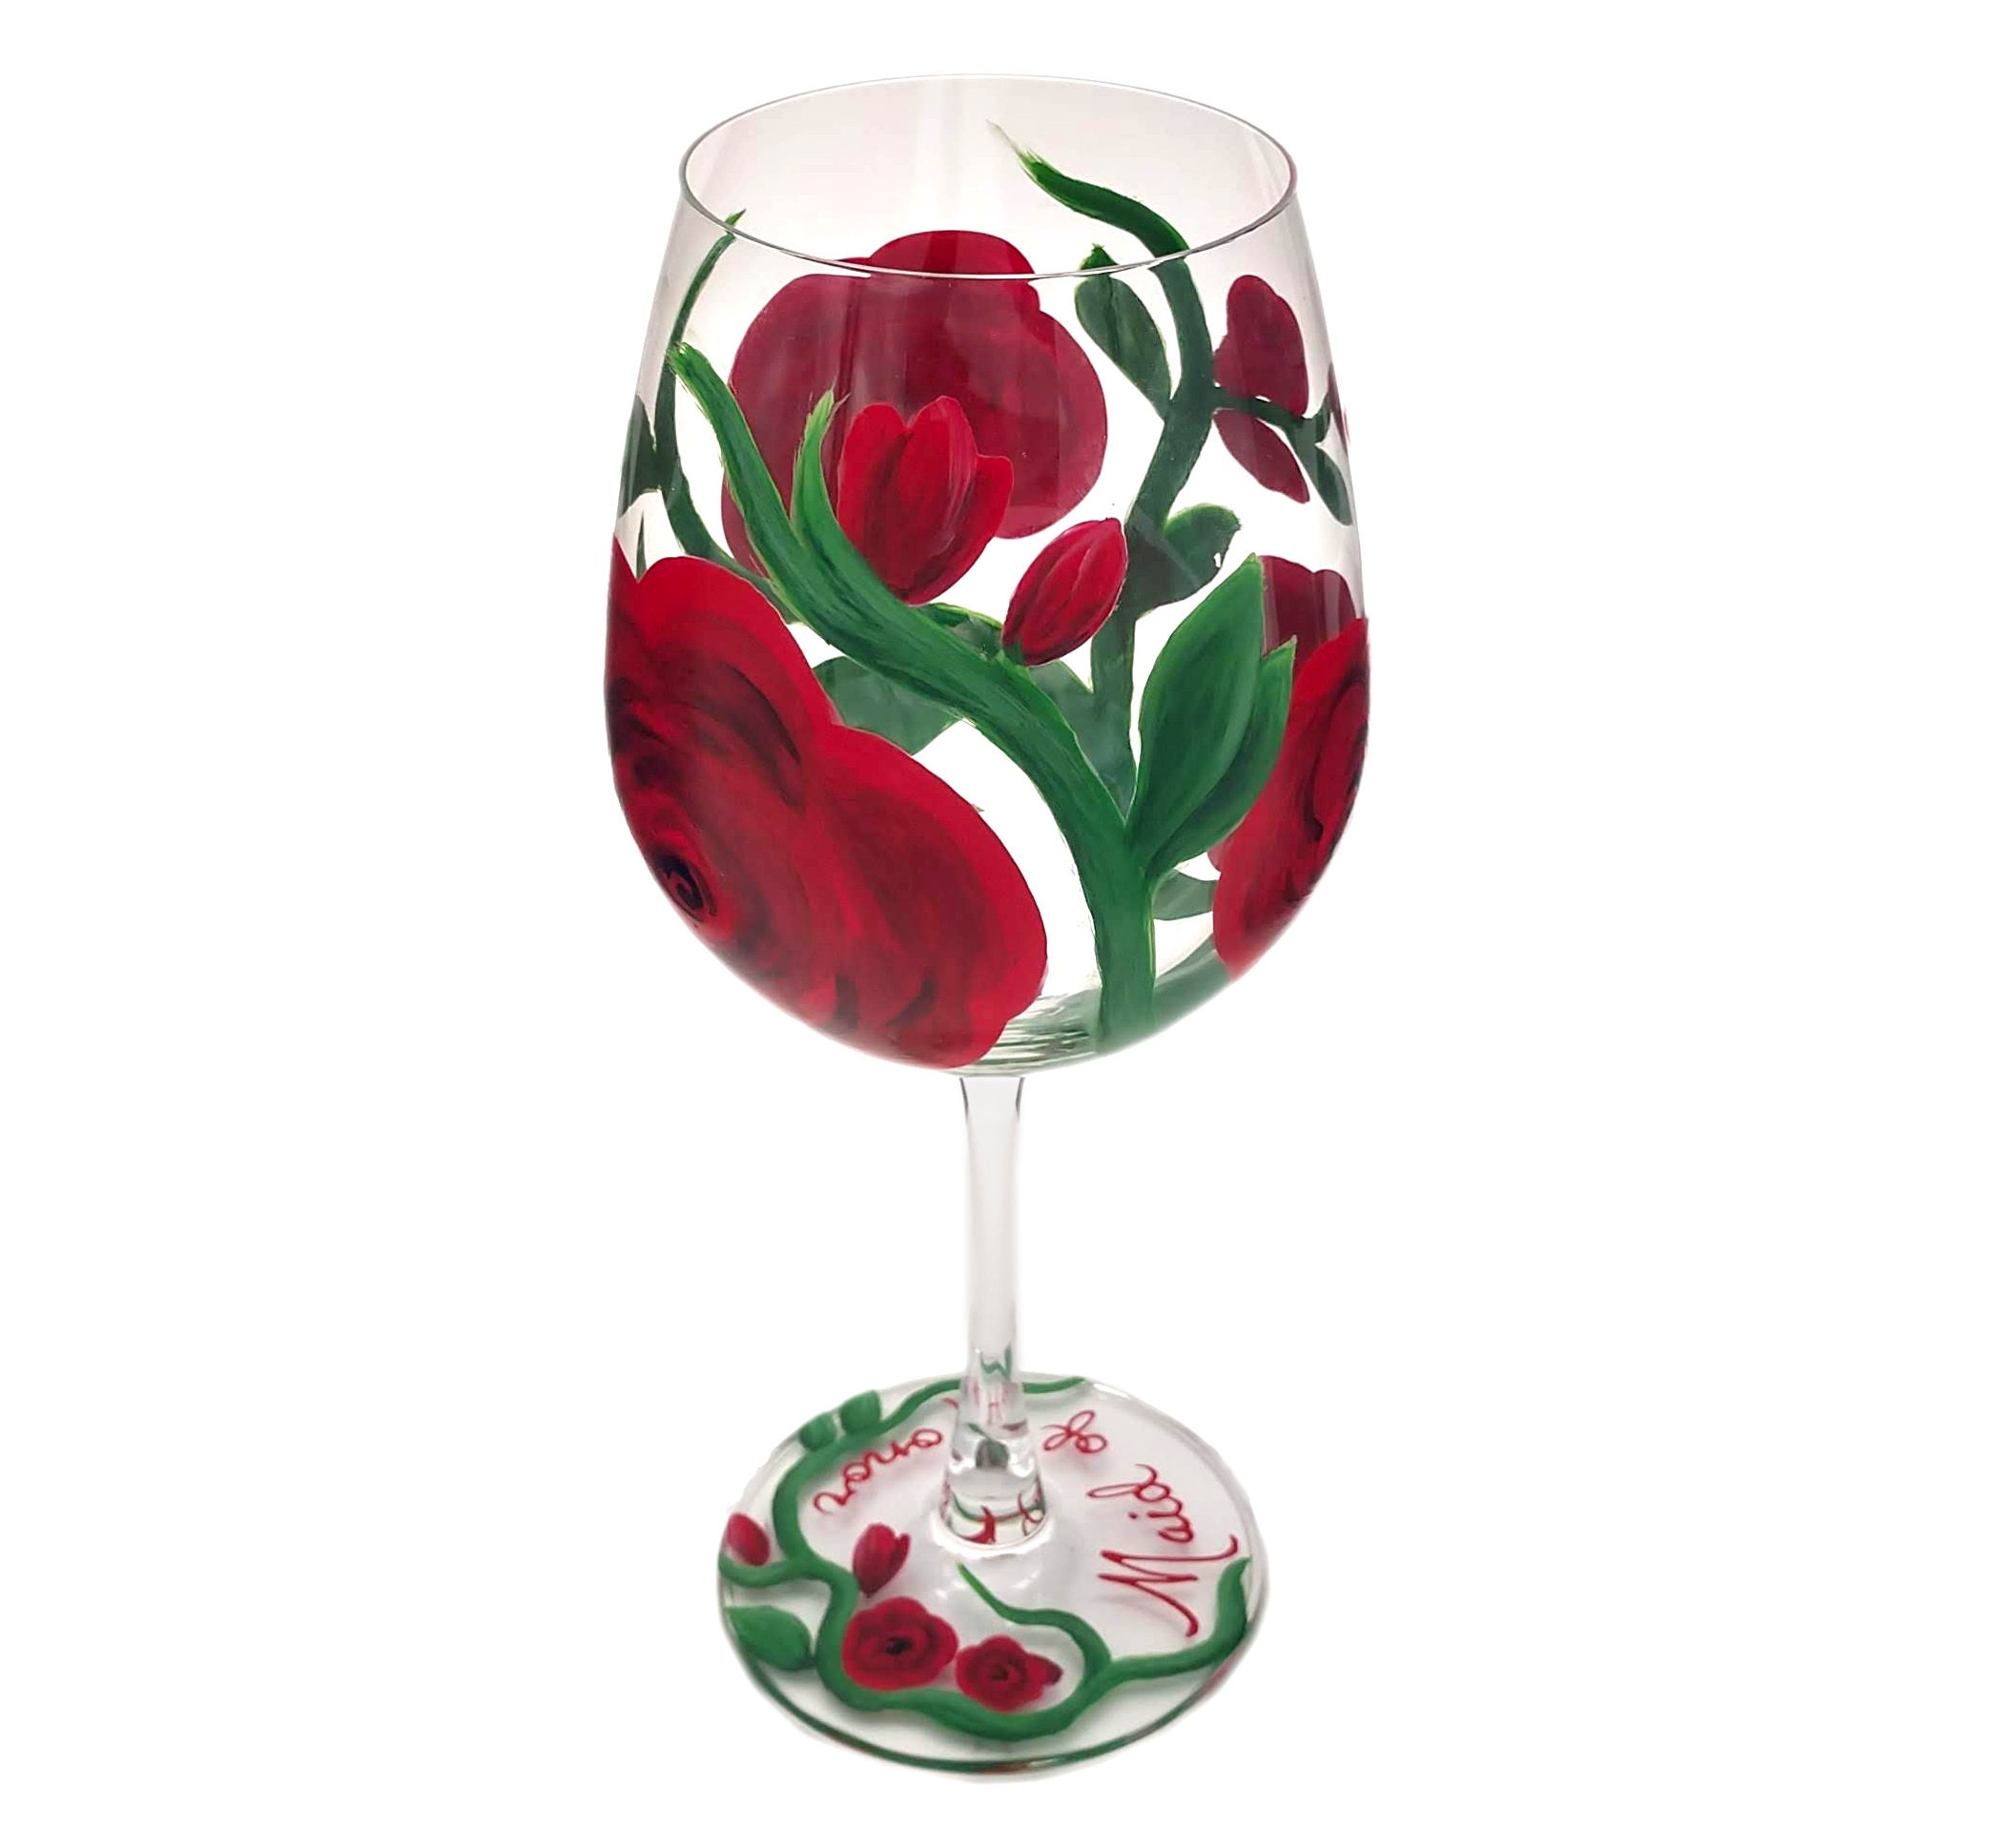 Red and Black Roses Large 25.5 Wine Glasses Set of 2 Hand Painted